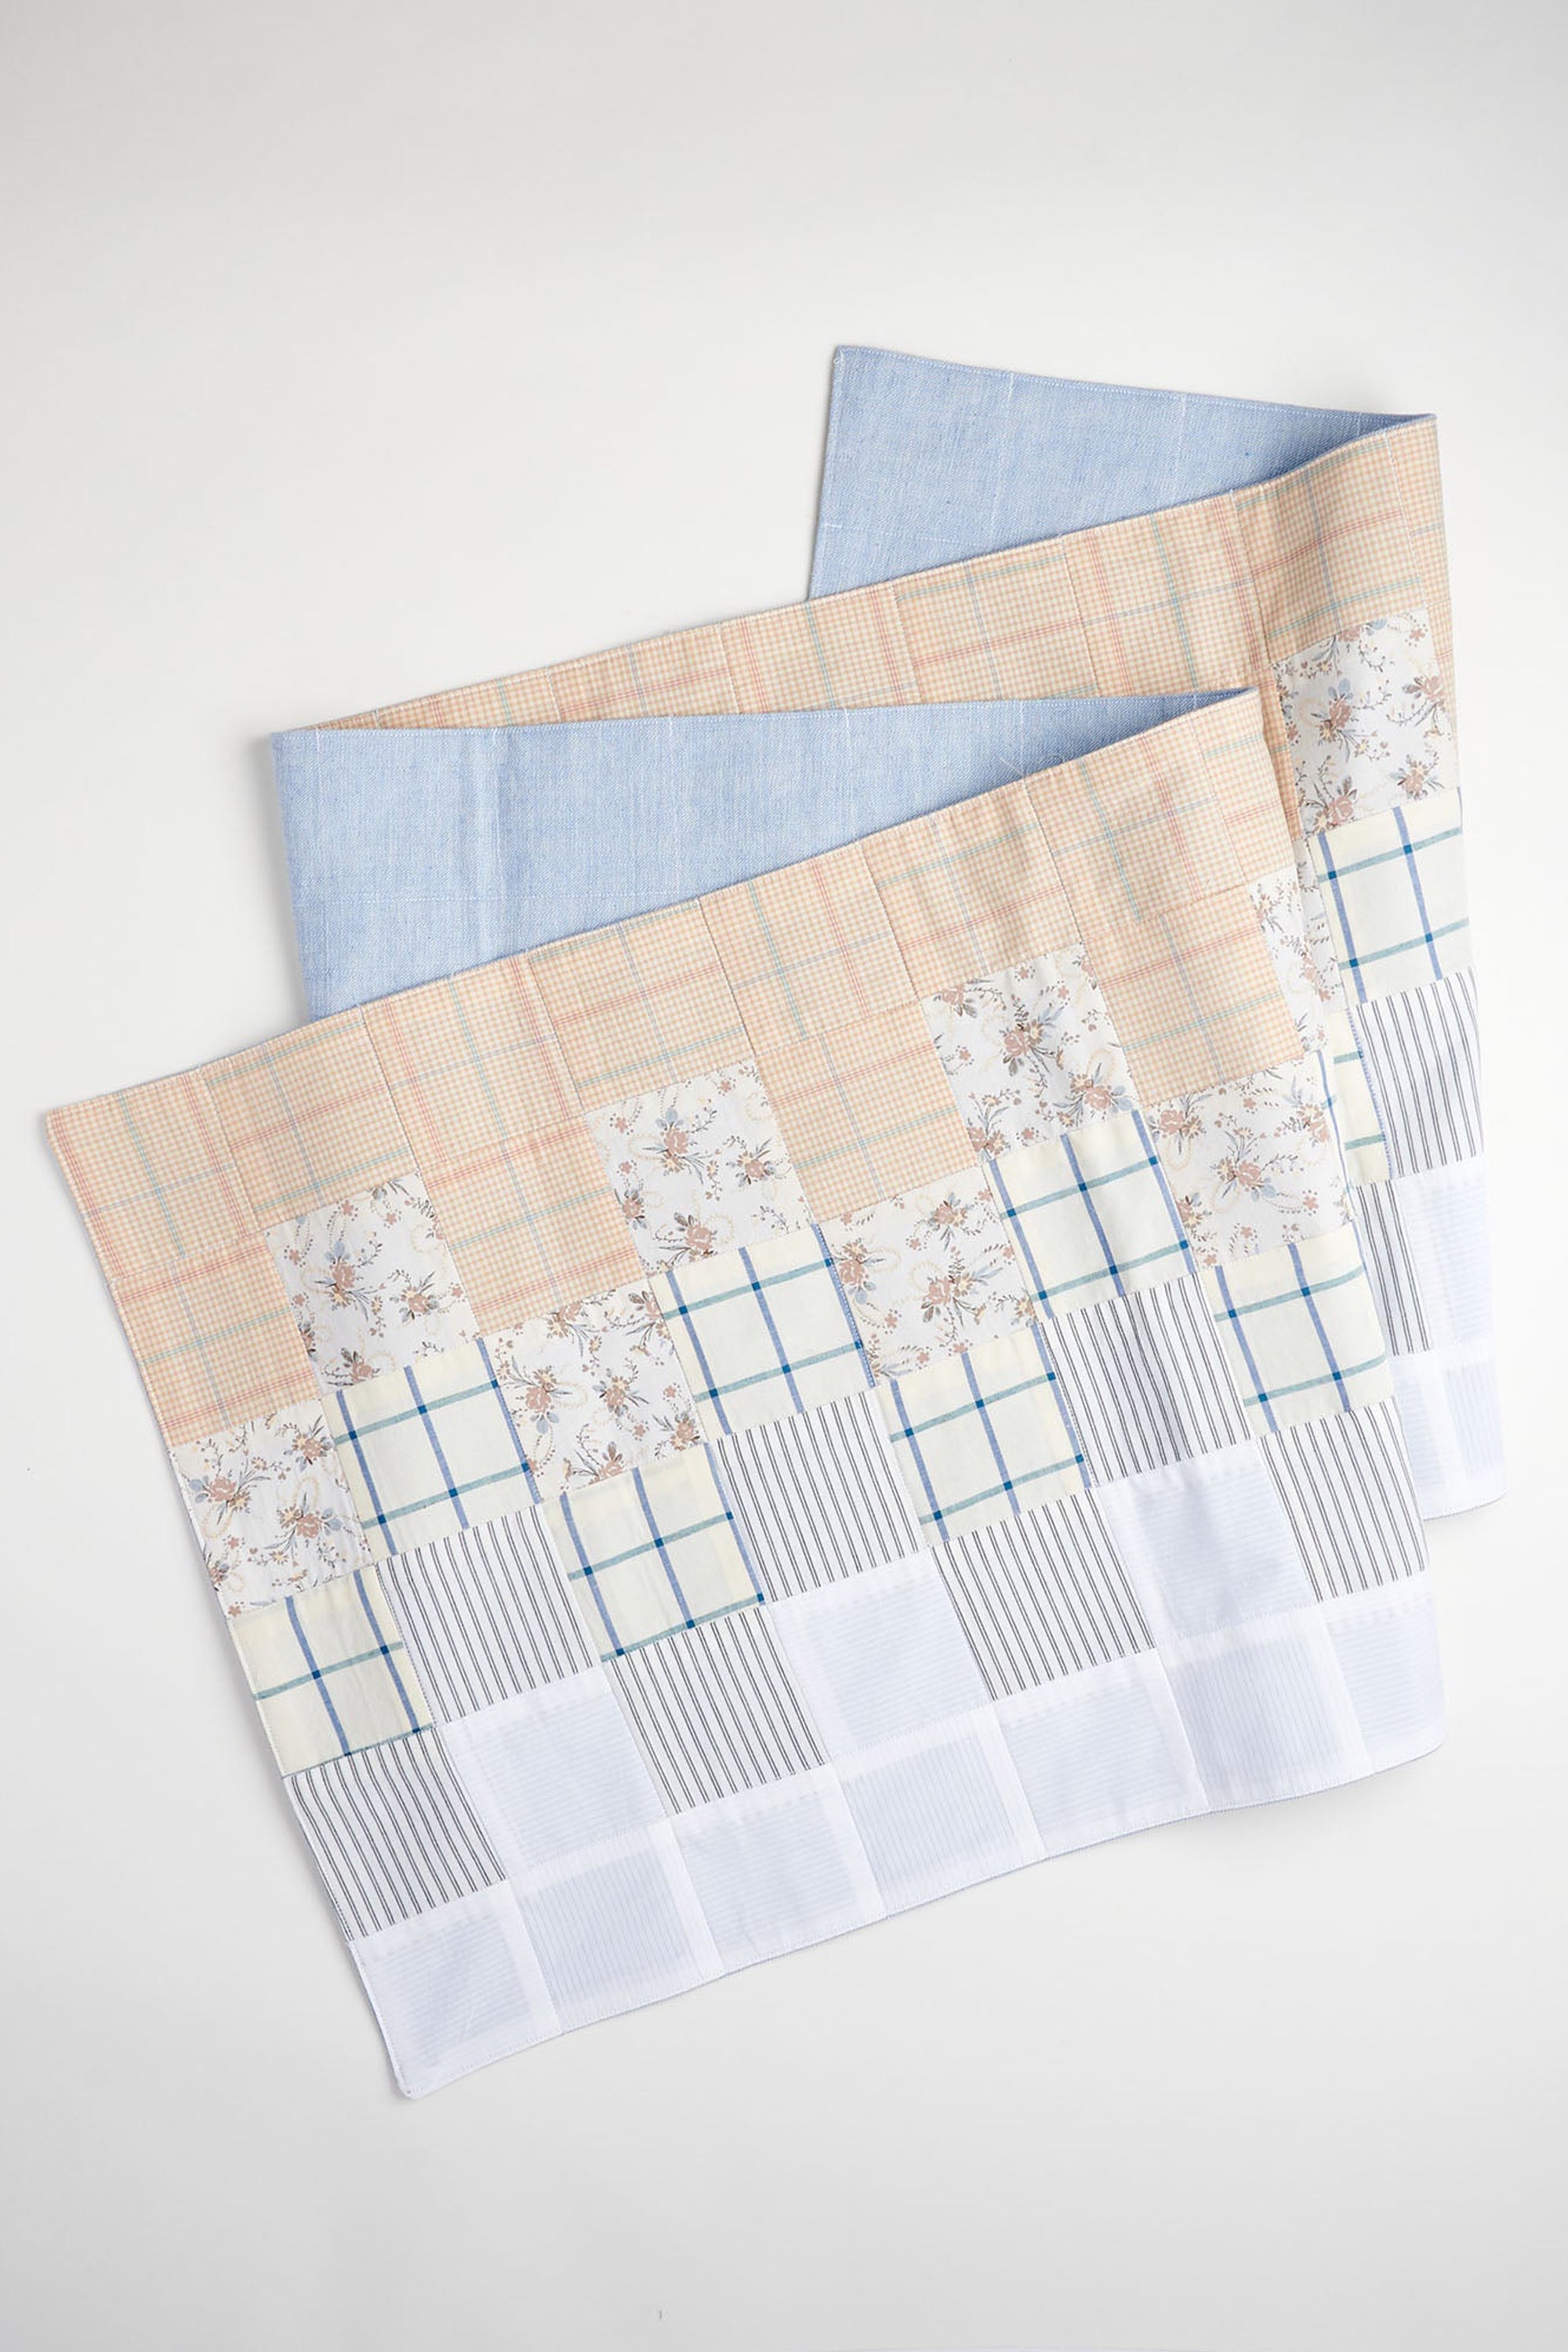 Rentrayage Patchwork Table Runner